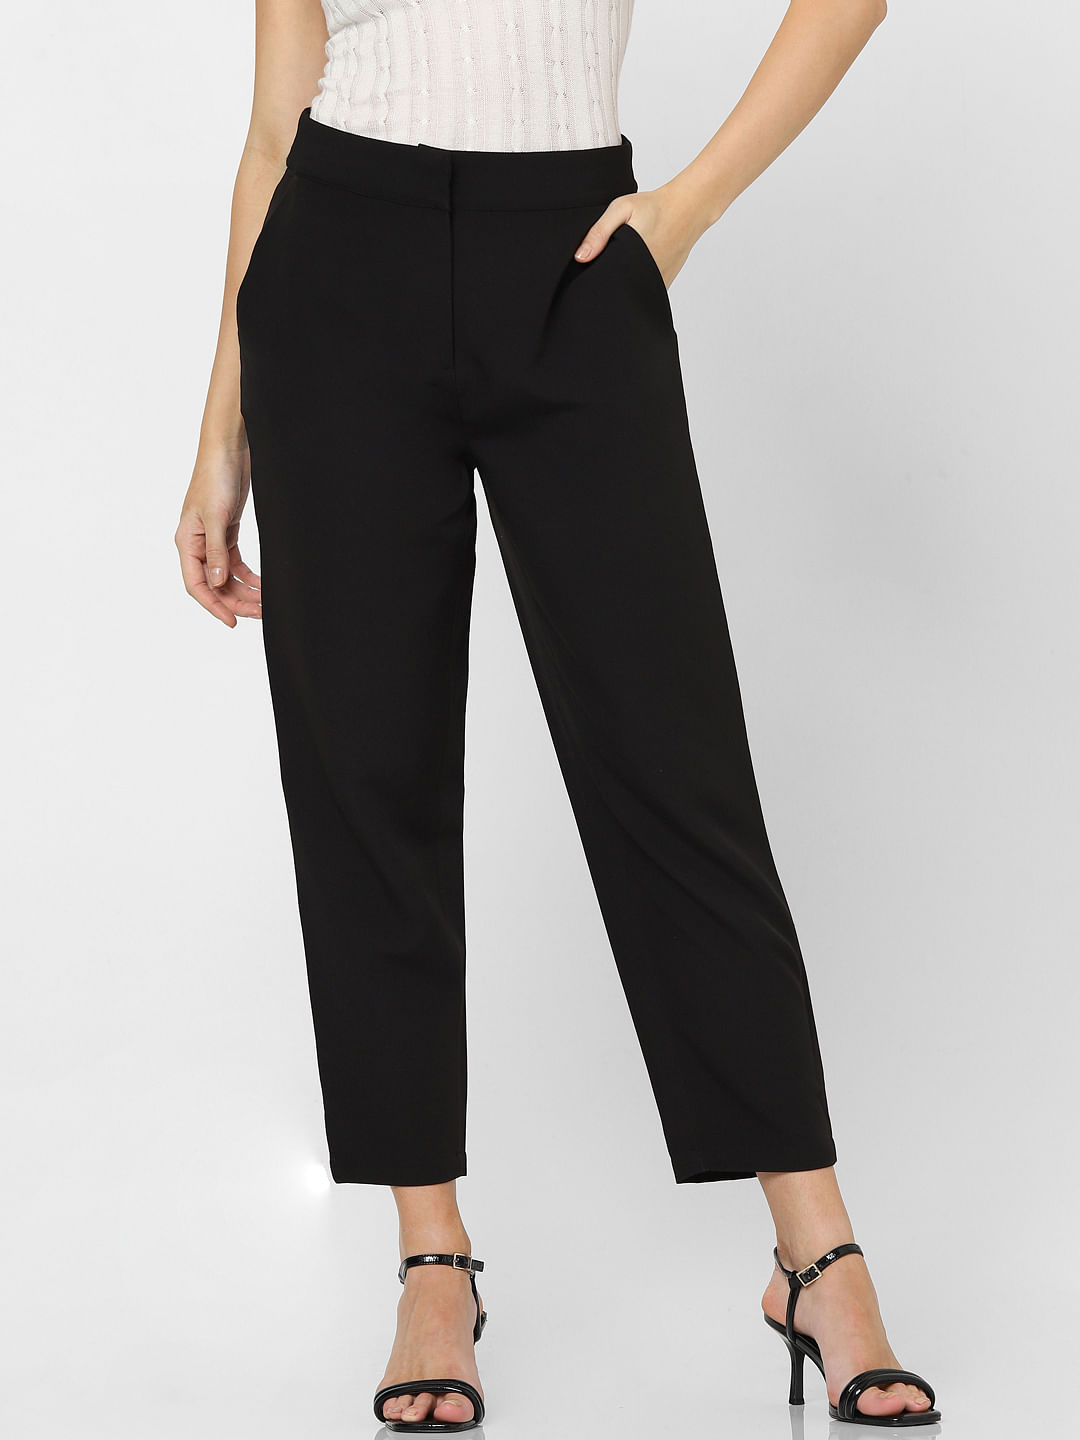 Women's High Waisted Pants | Explore our New Arrivals | ZARA United States